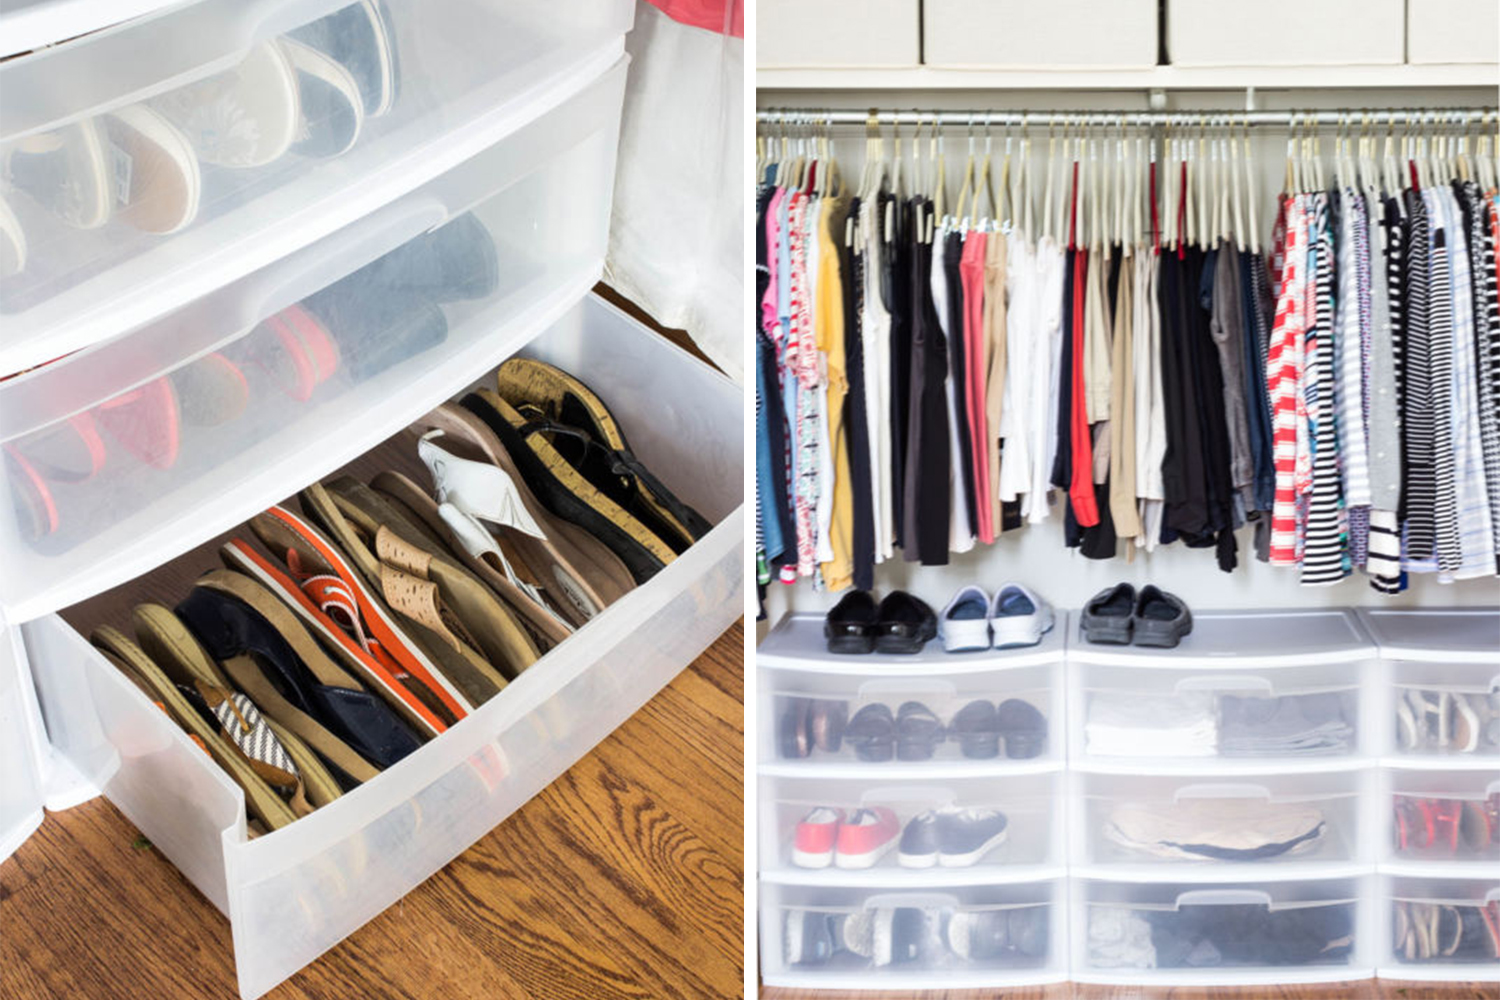 How to Organize your shoes // sandal organizing // cheap closet drawers // shoe organizing // under bed shoe storage products // organizers // shoe storage ideas // underbed storage // small space solutions // www.simplyspaced.com 